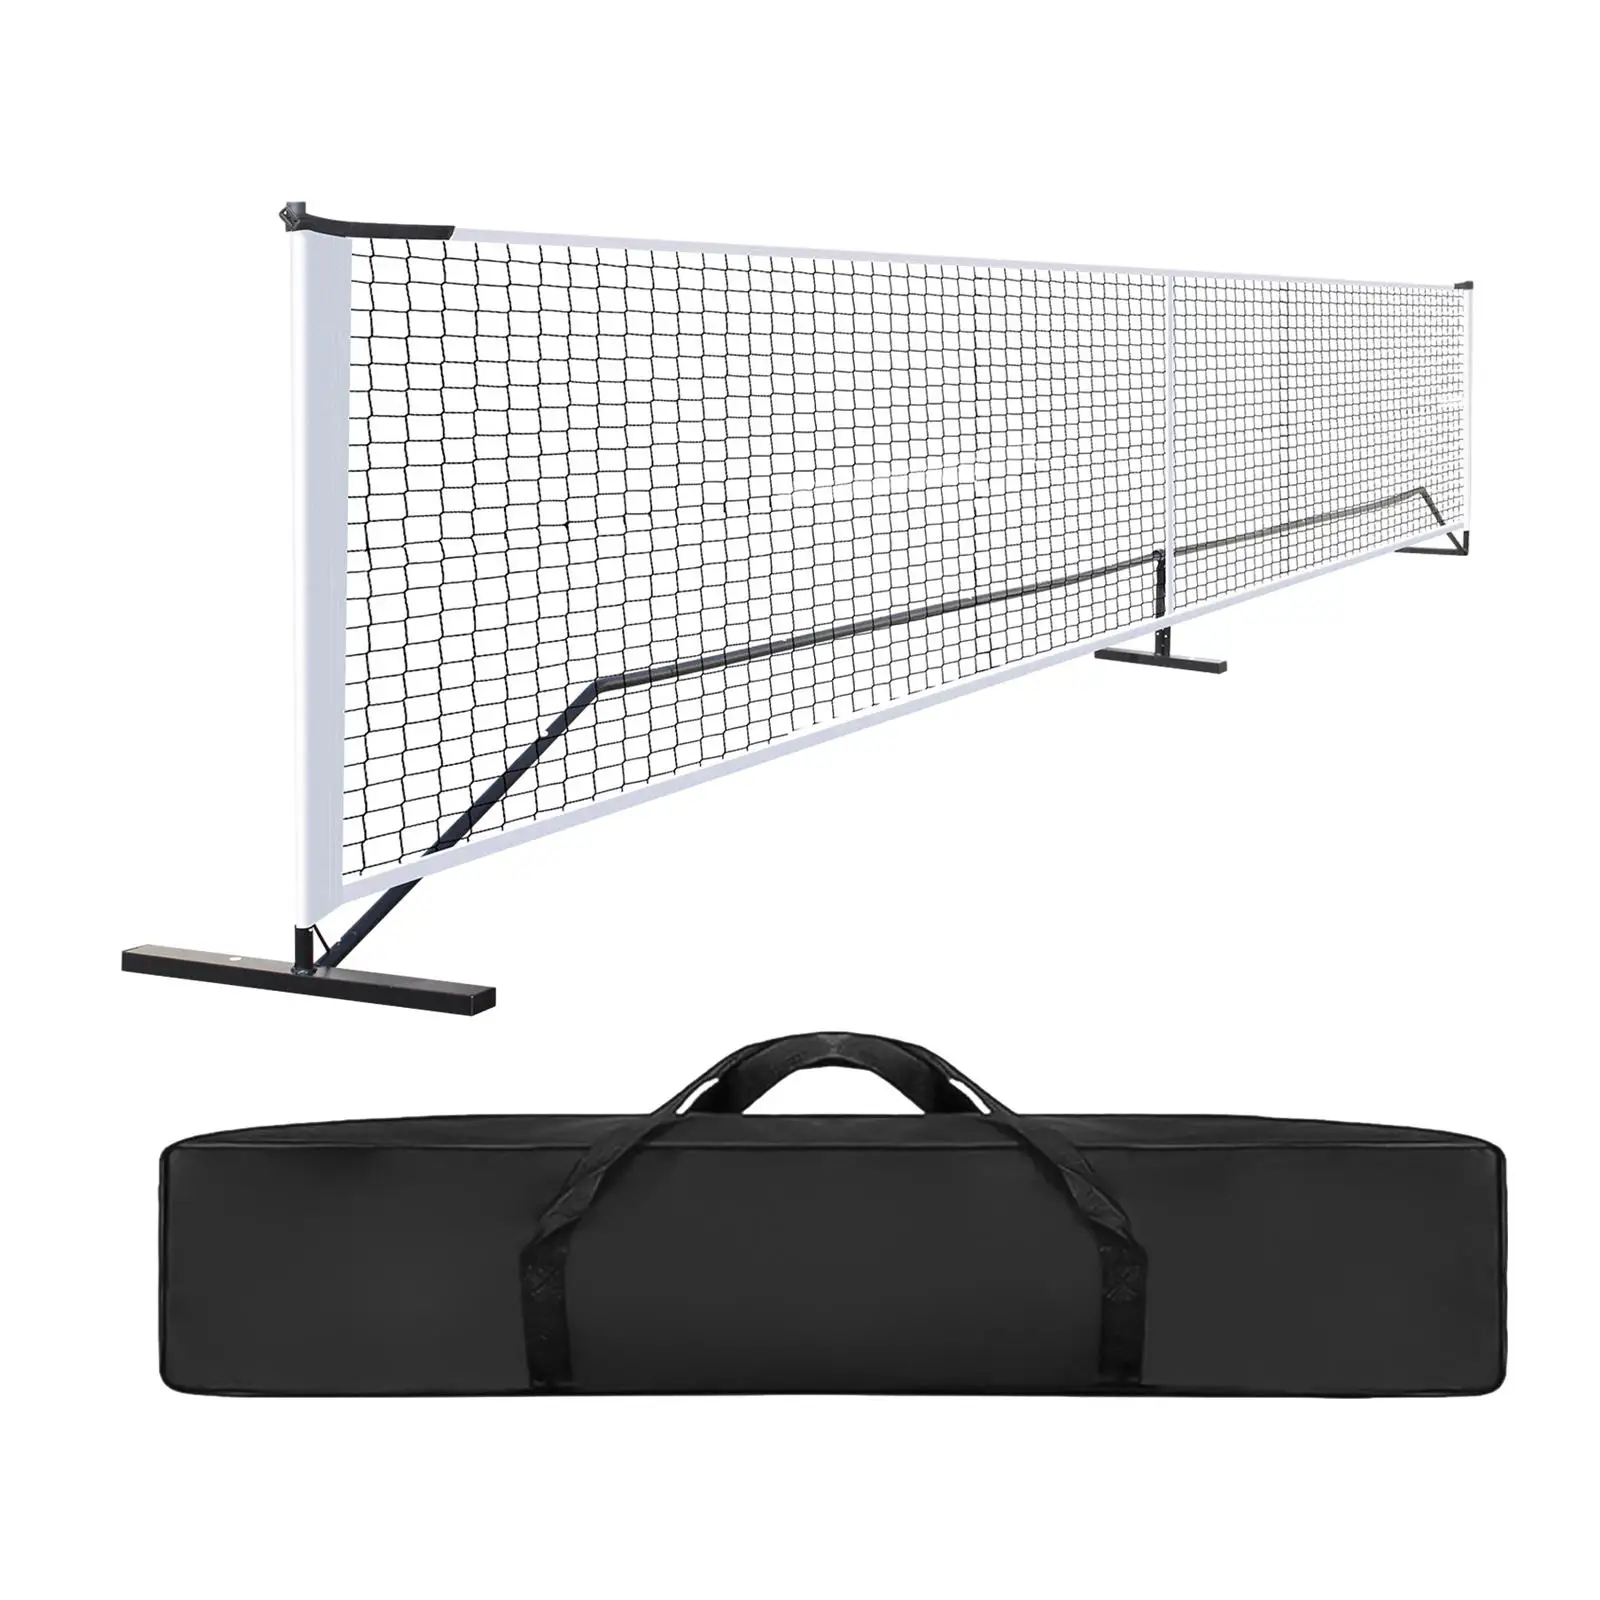 Portable Pickleball Net with Carrying Bag 22ft Sports Net for Driveway Indoor Outdoor Game Volleyball Pickleball Training Beach